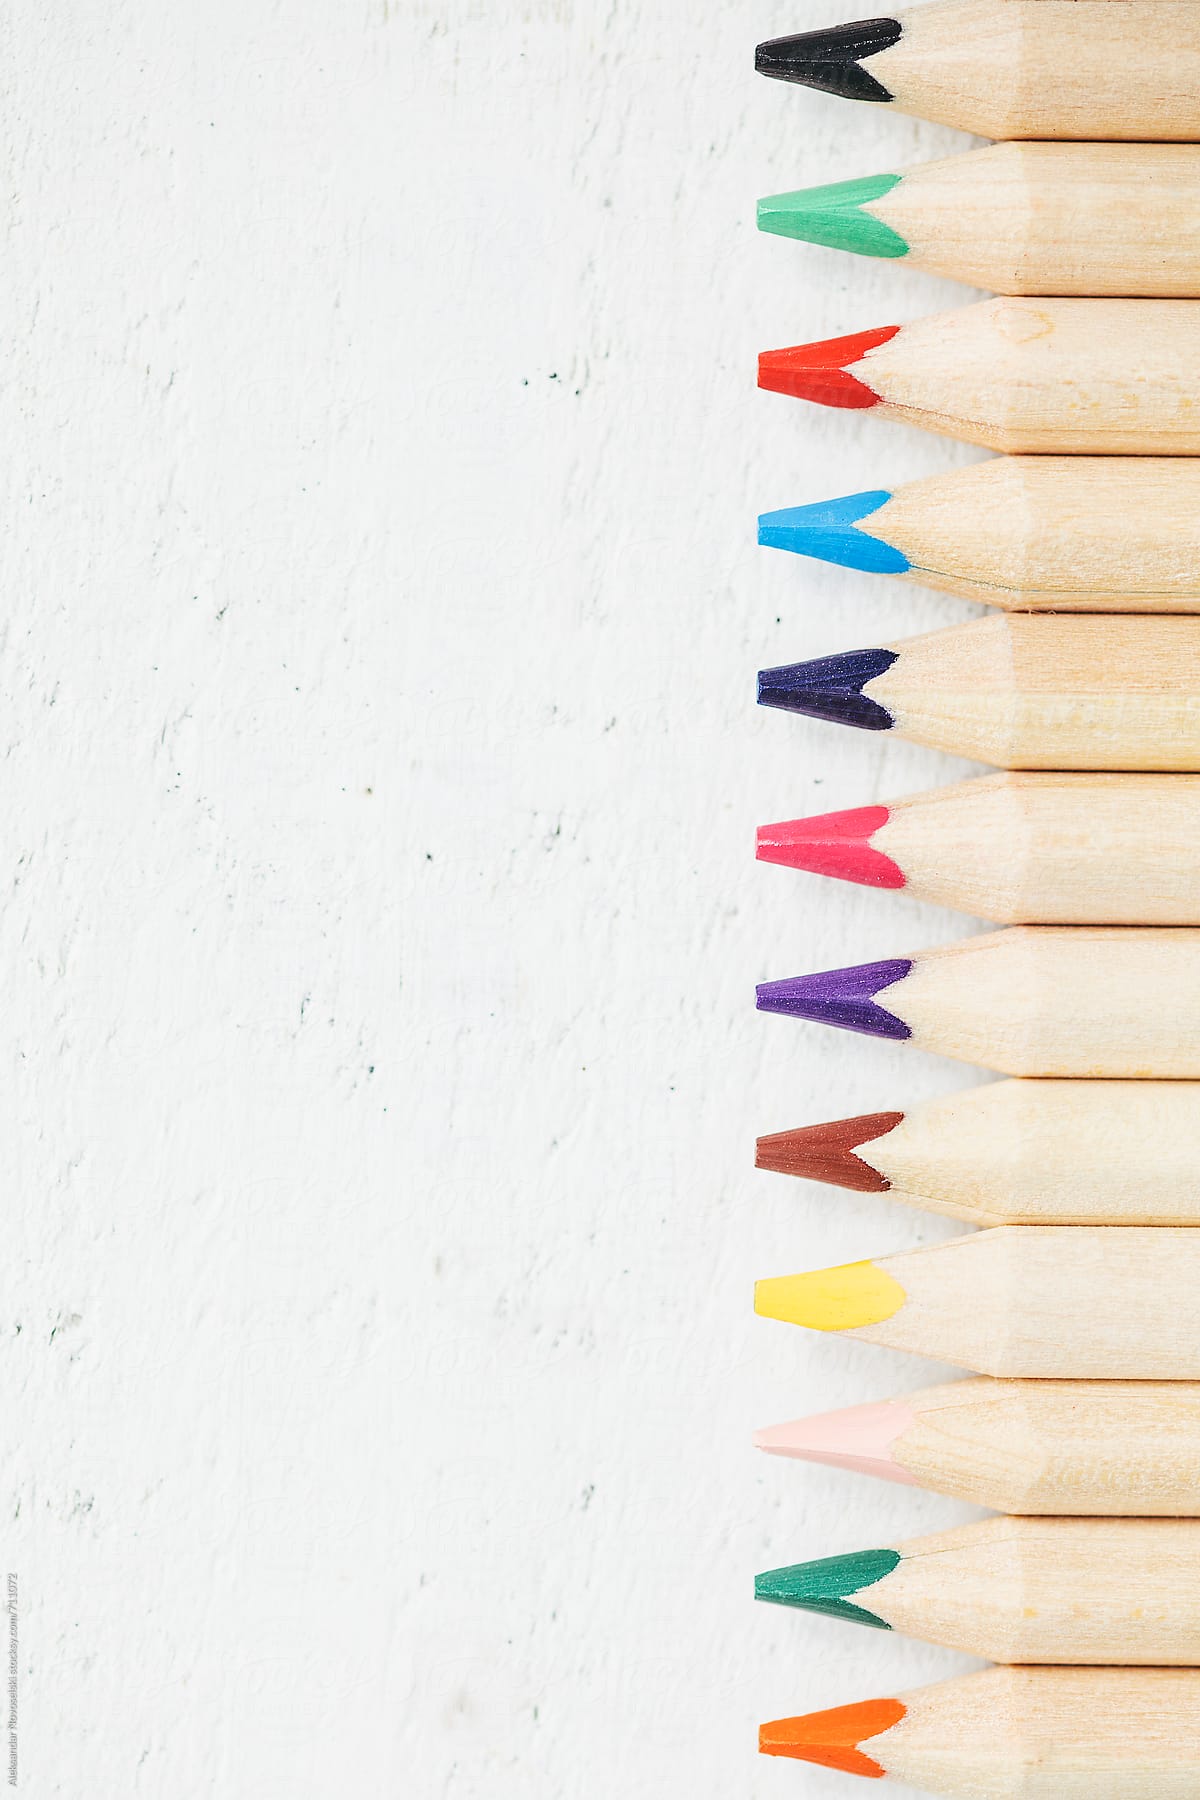 Set of colorful pencils against a white wooden background